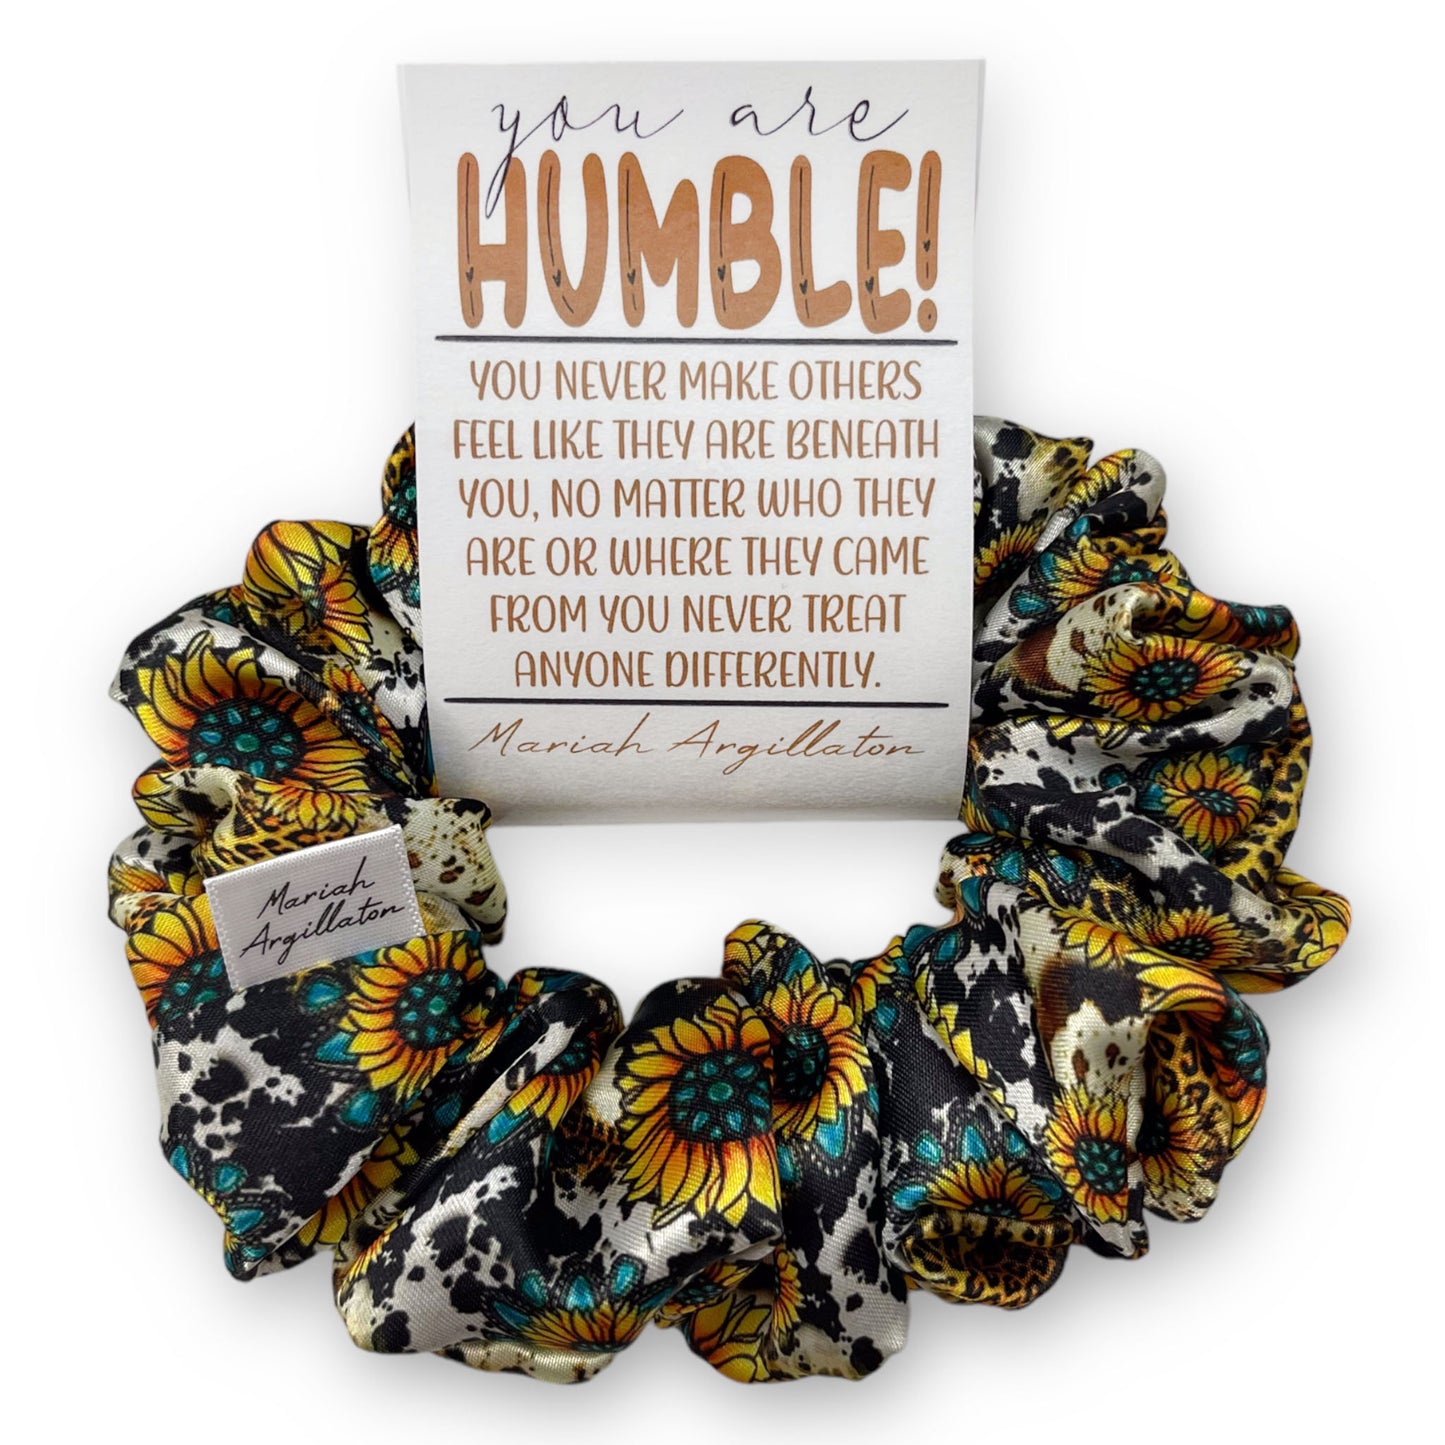 You Are Humble! Regular Scrunchie!